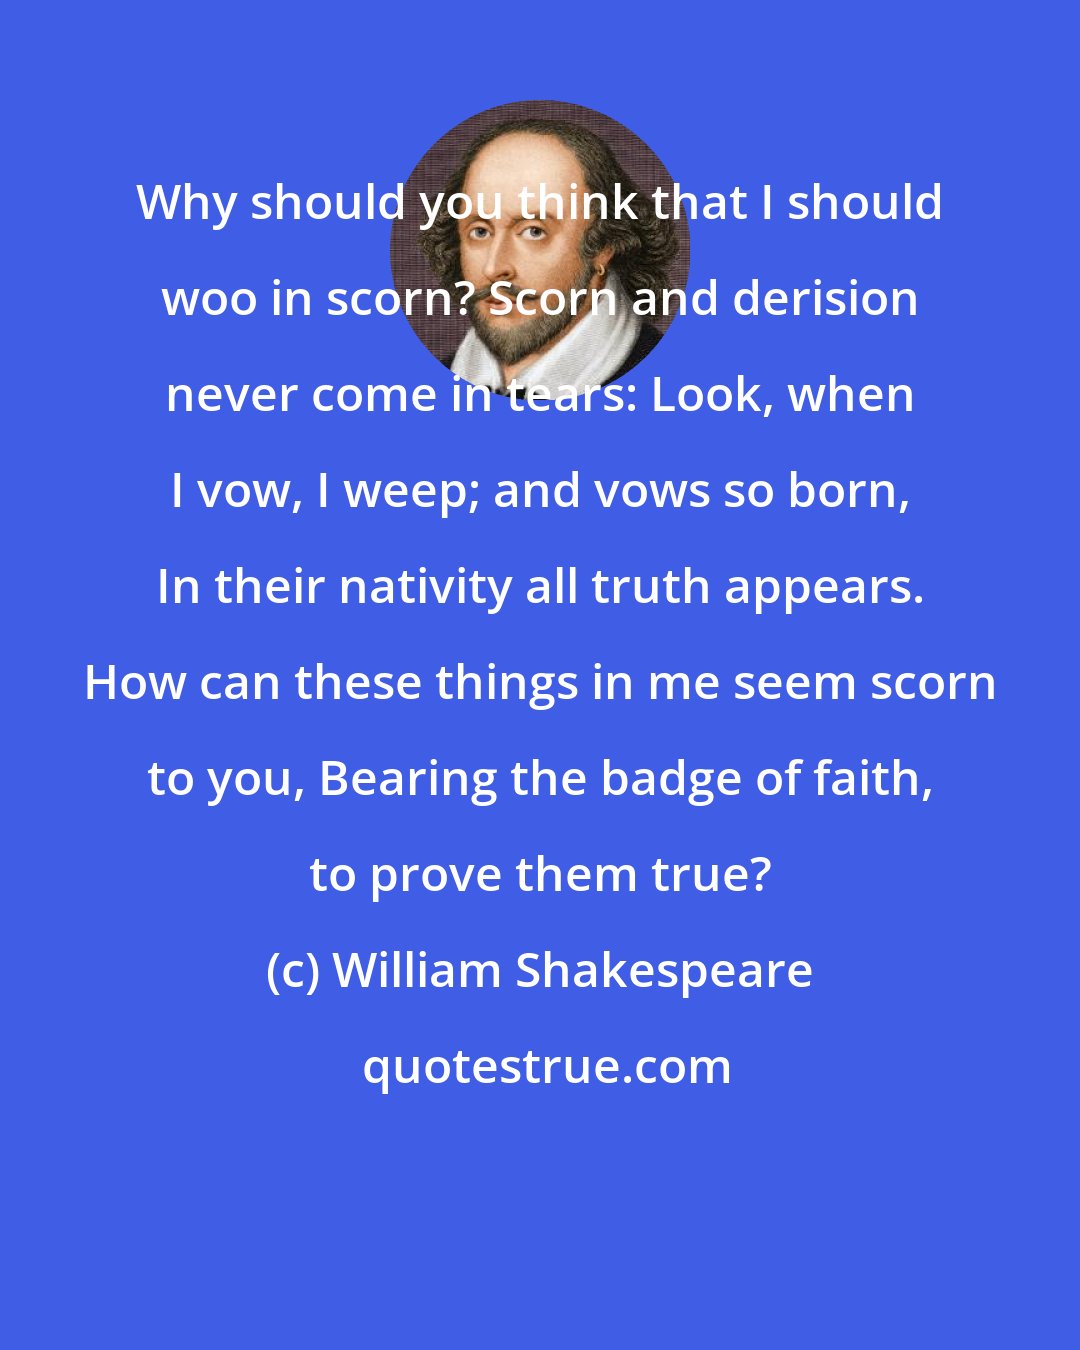 William Shakespeare: Why should you think that I should woo in scorn? Scorn and derision never come in tears: Look, when I vow, I weep; and vows so born, In their nativity all truth appears. How can these things in me seem scorn to you, Bearing the badge of faith, to prove them true?